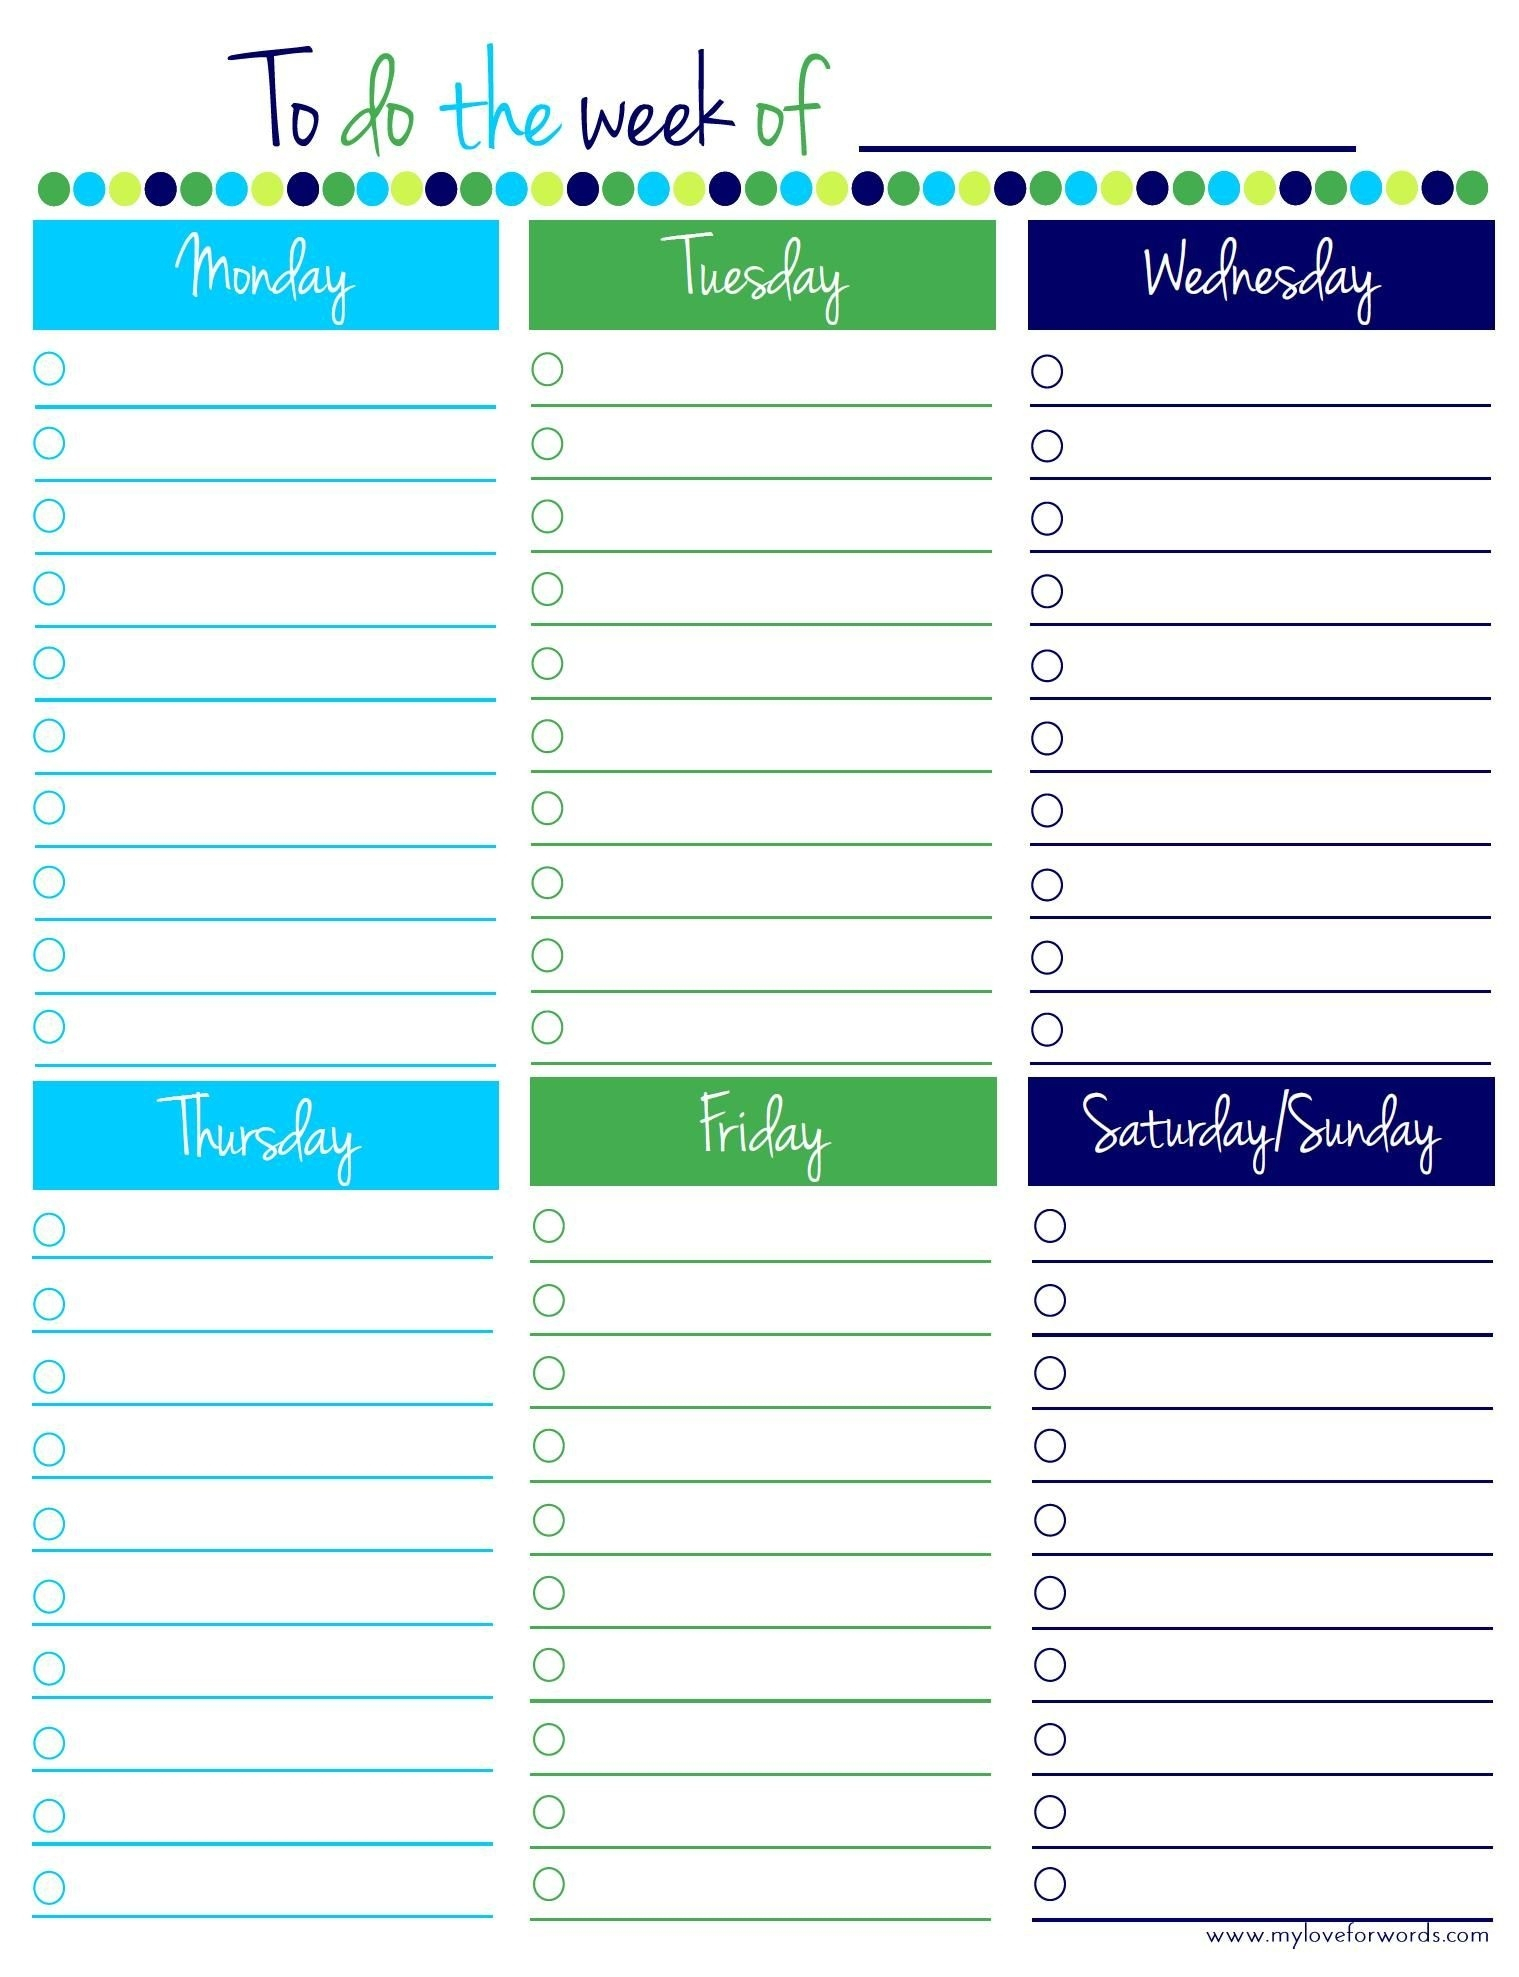 Free Weekly Planner Template Monday To Friday  Template Calendar Design with On Monday To Friday